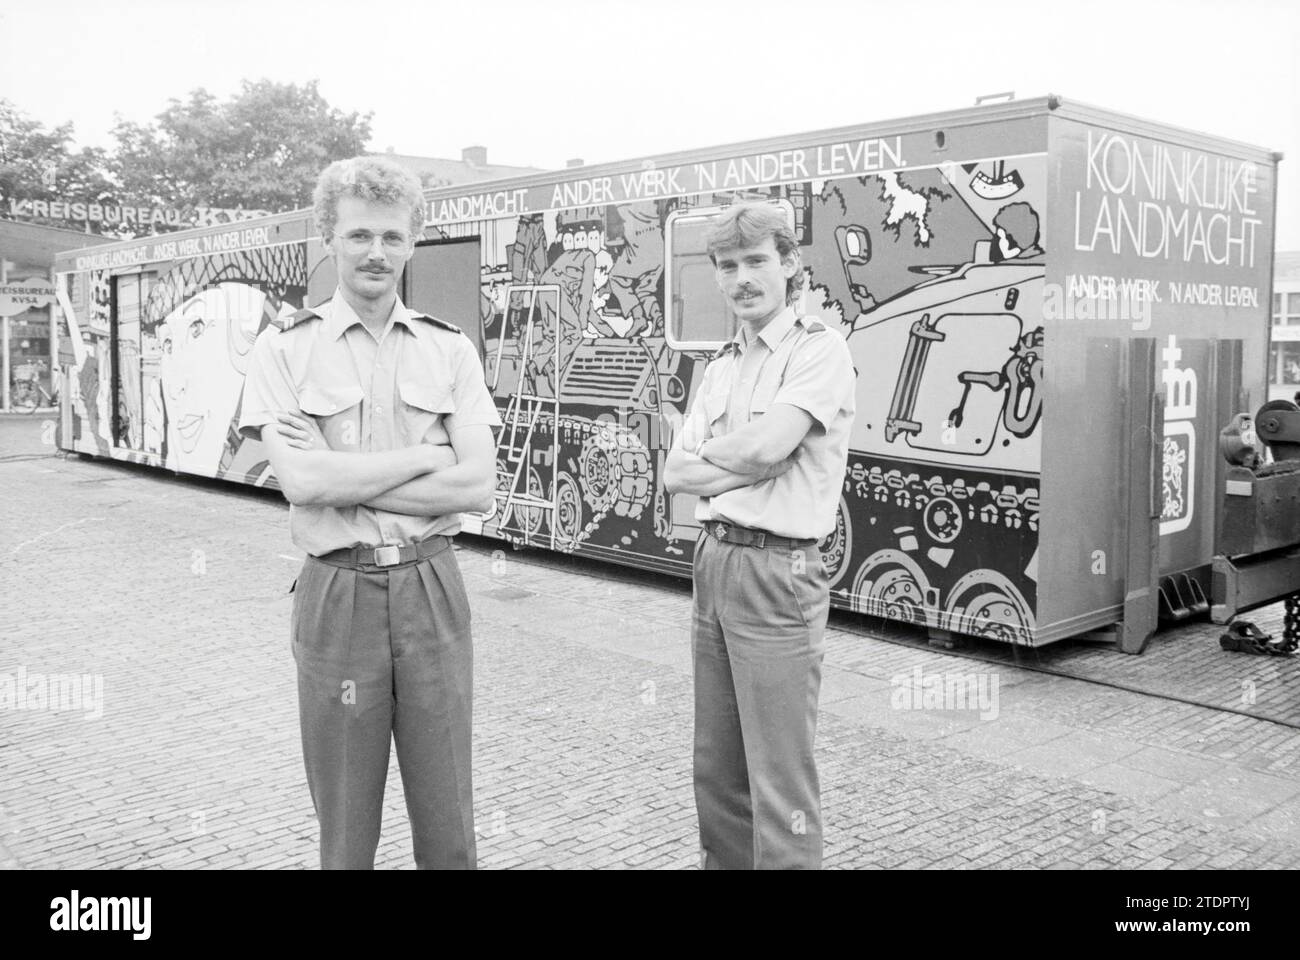 Royal Army recruitment van in IJmuiden, Army, IJmuiden, The Netherlands, 27-05-1988, Whizgle News from the Past, Tailored for the Future. Explore historical narratives, Dutch The Netherlands agency image with a modern perspective, bridging the gap between yesterday's events and tomorrow's insights. A timeless journey shaping the stories that shape our future Stock Photo